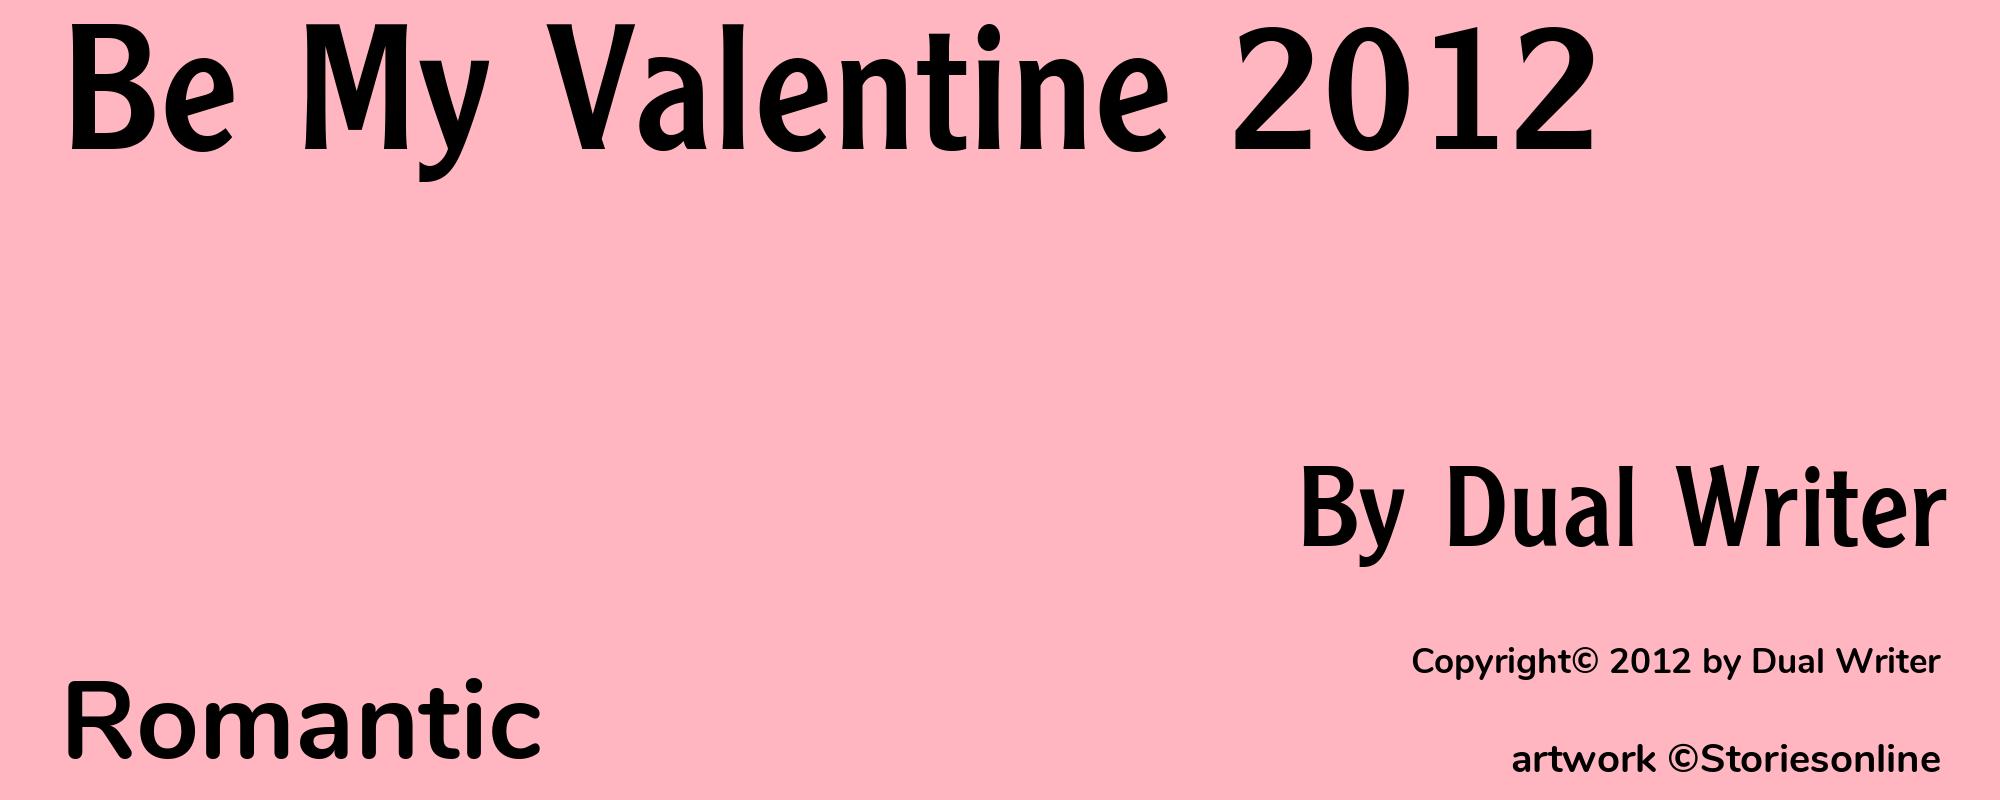 Be My Valentine 2012 - Cover